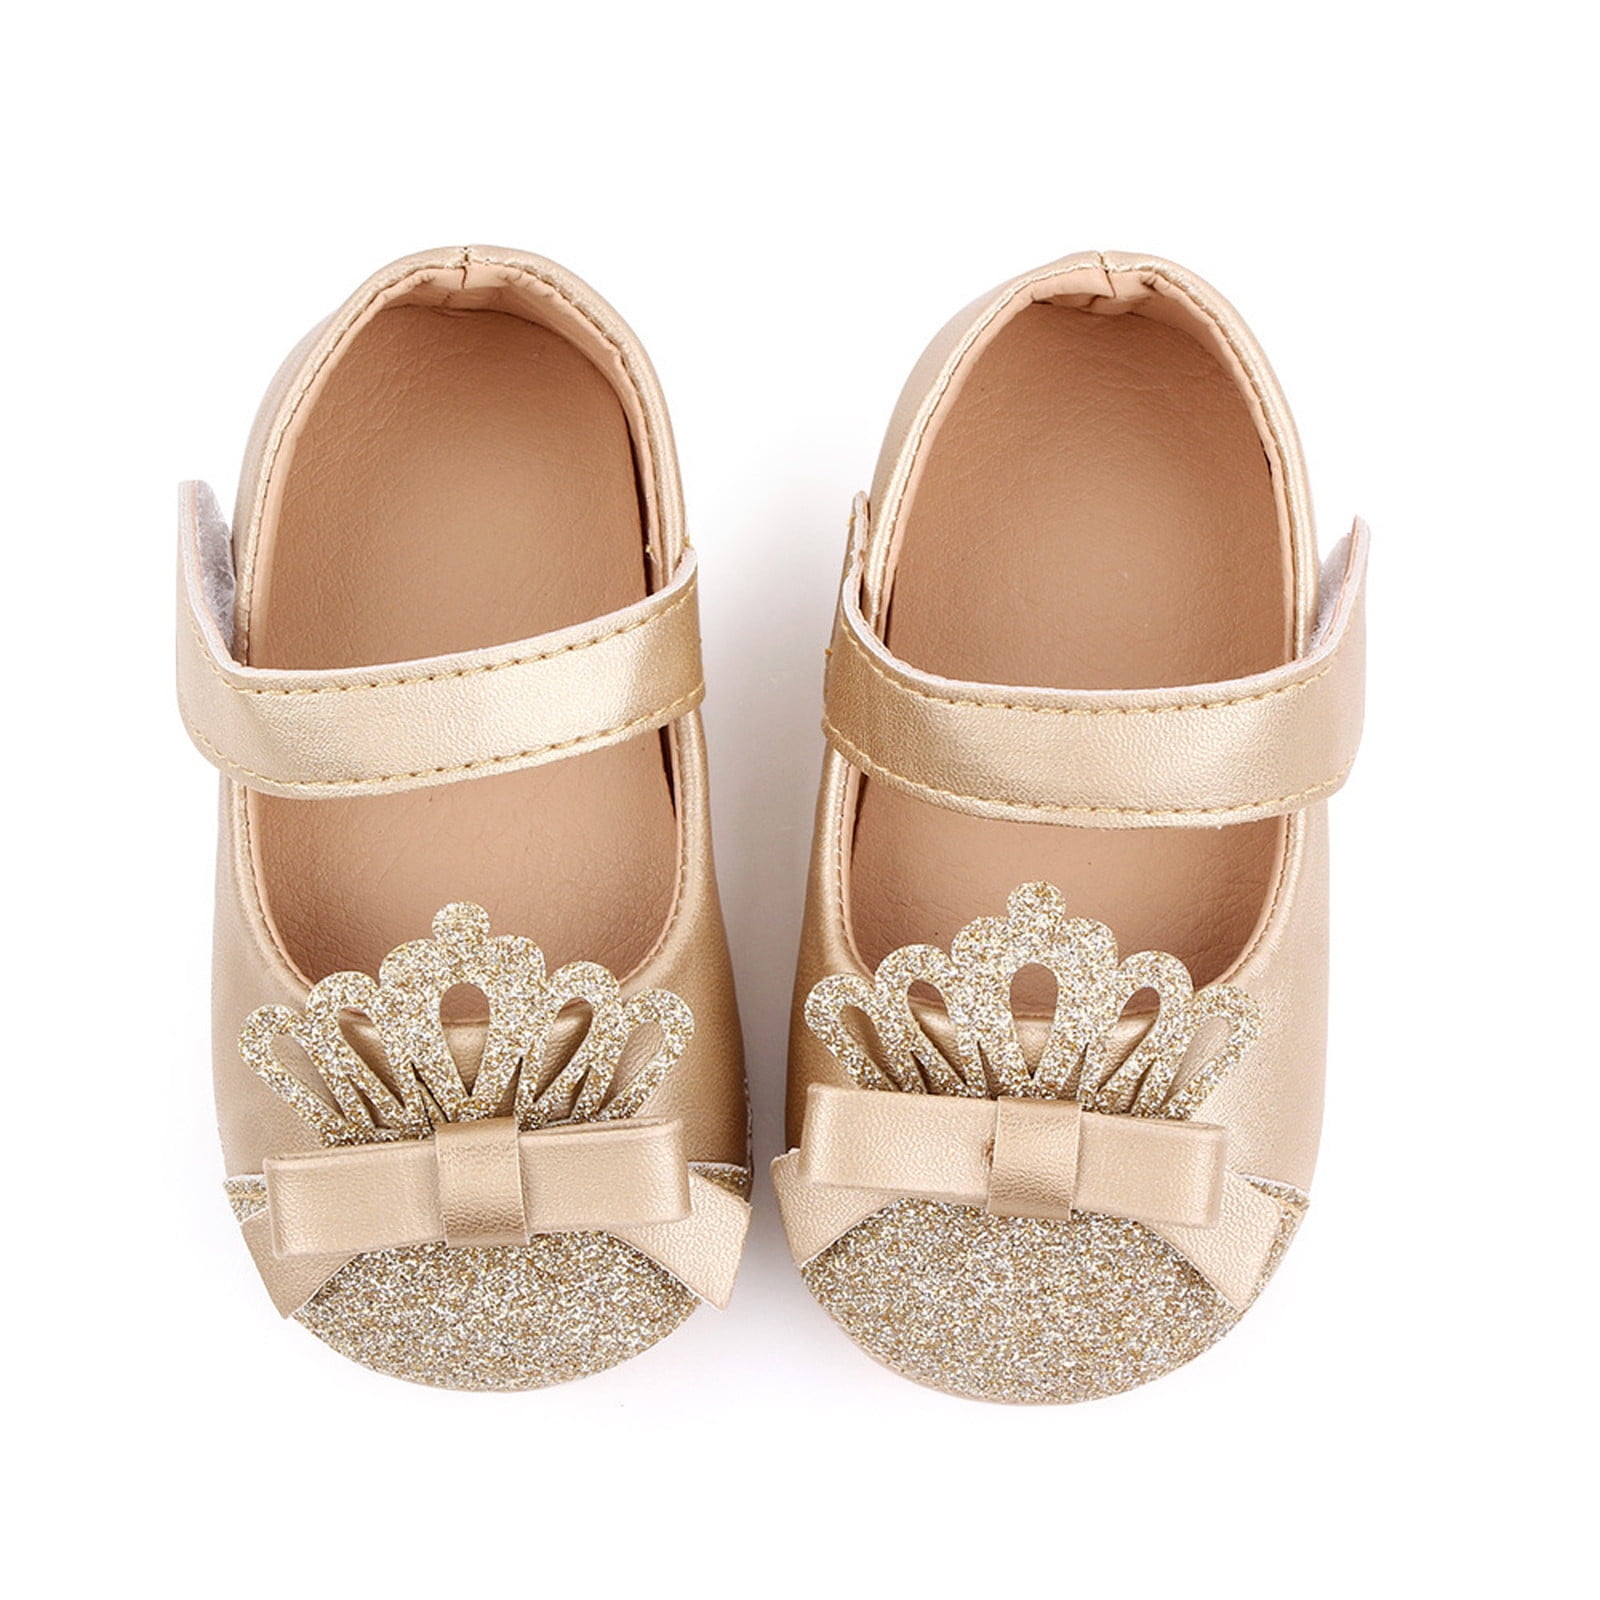 Wavsuf Toddler Shoes for Girls Winter Soft Bottom Casual Gold Princess ...